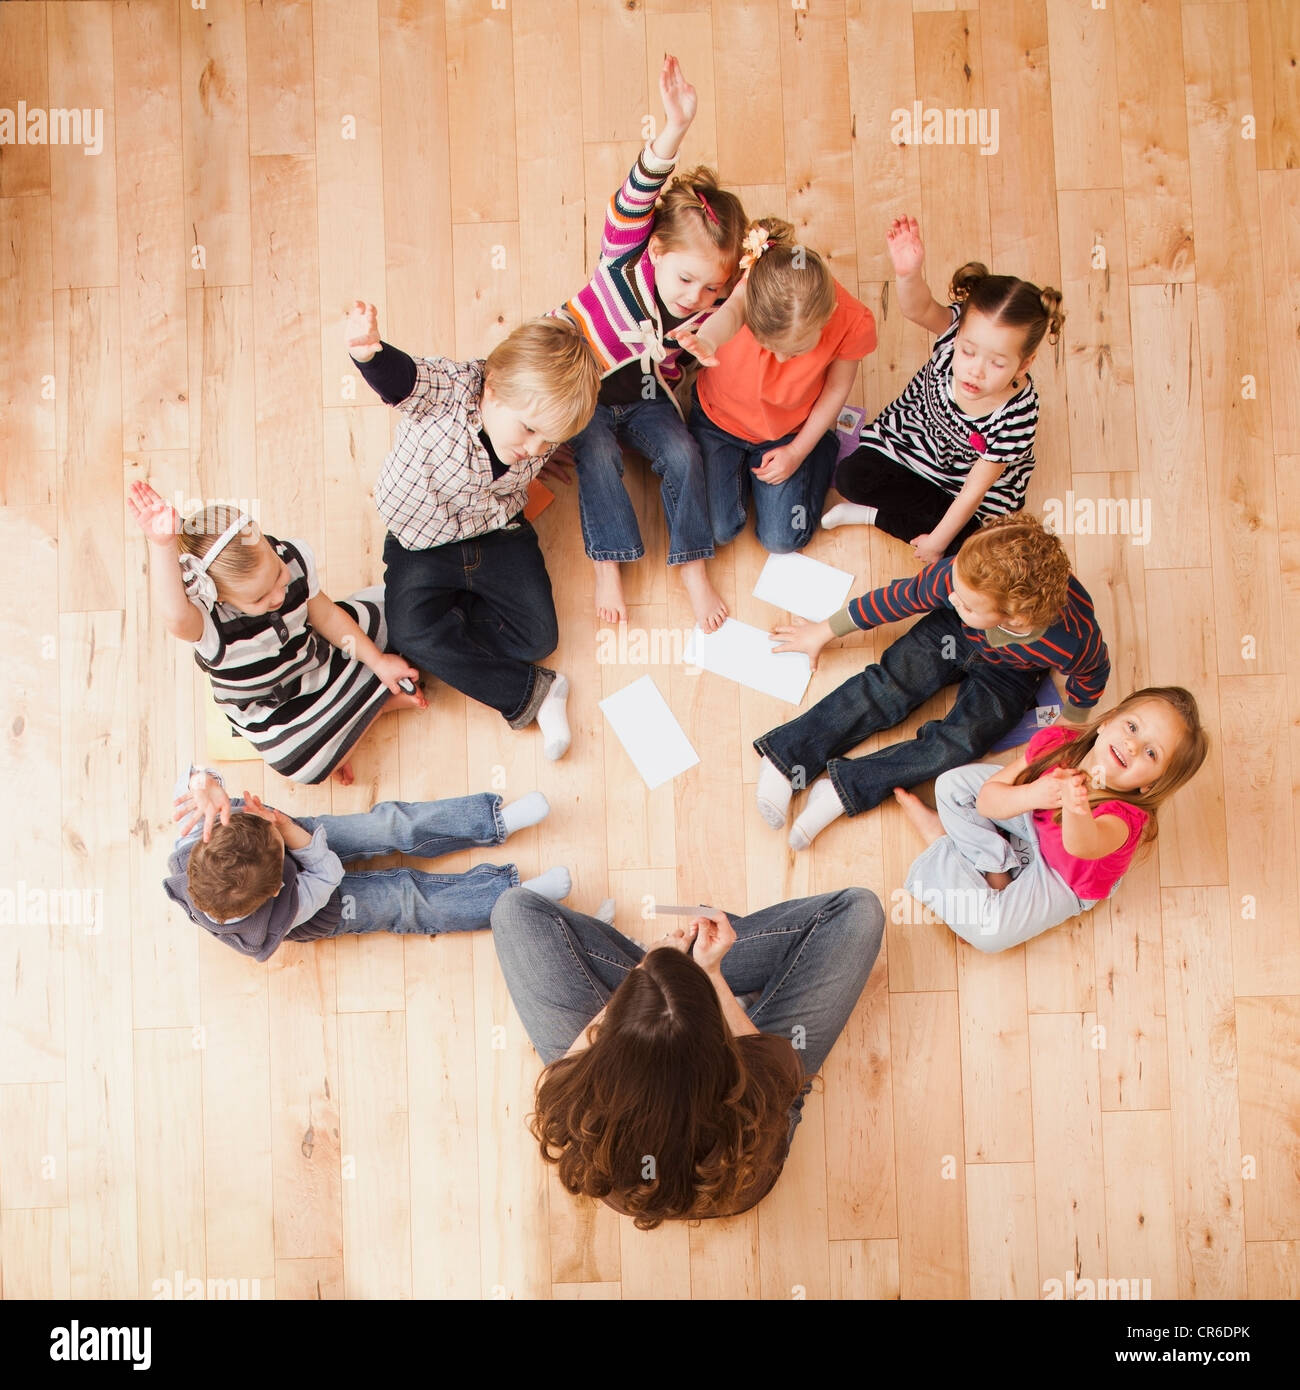 Children (2-3, 4-5) sitting on floor and raising hands, directly above Stock Photo